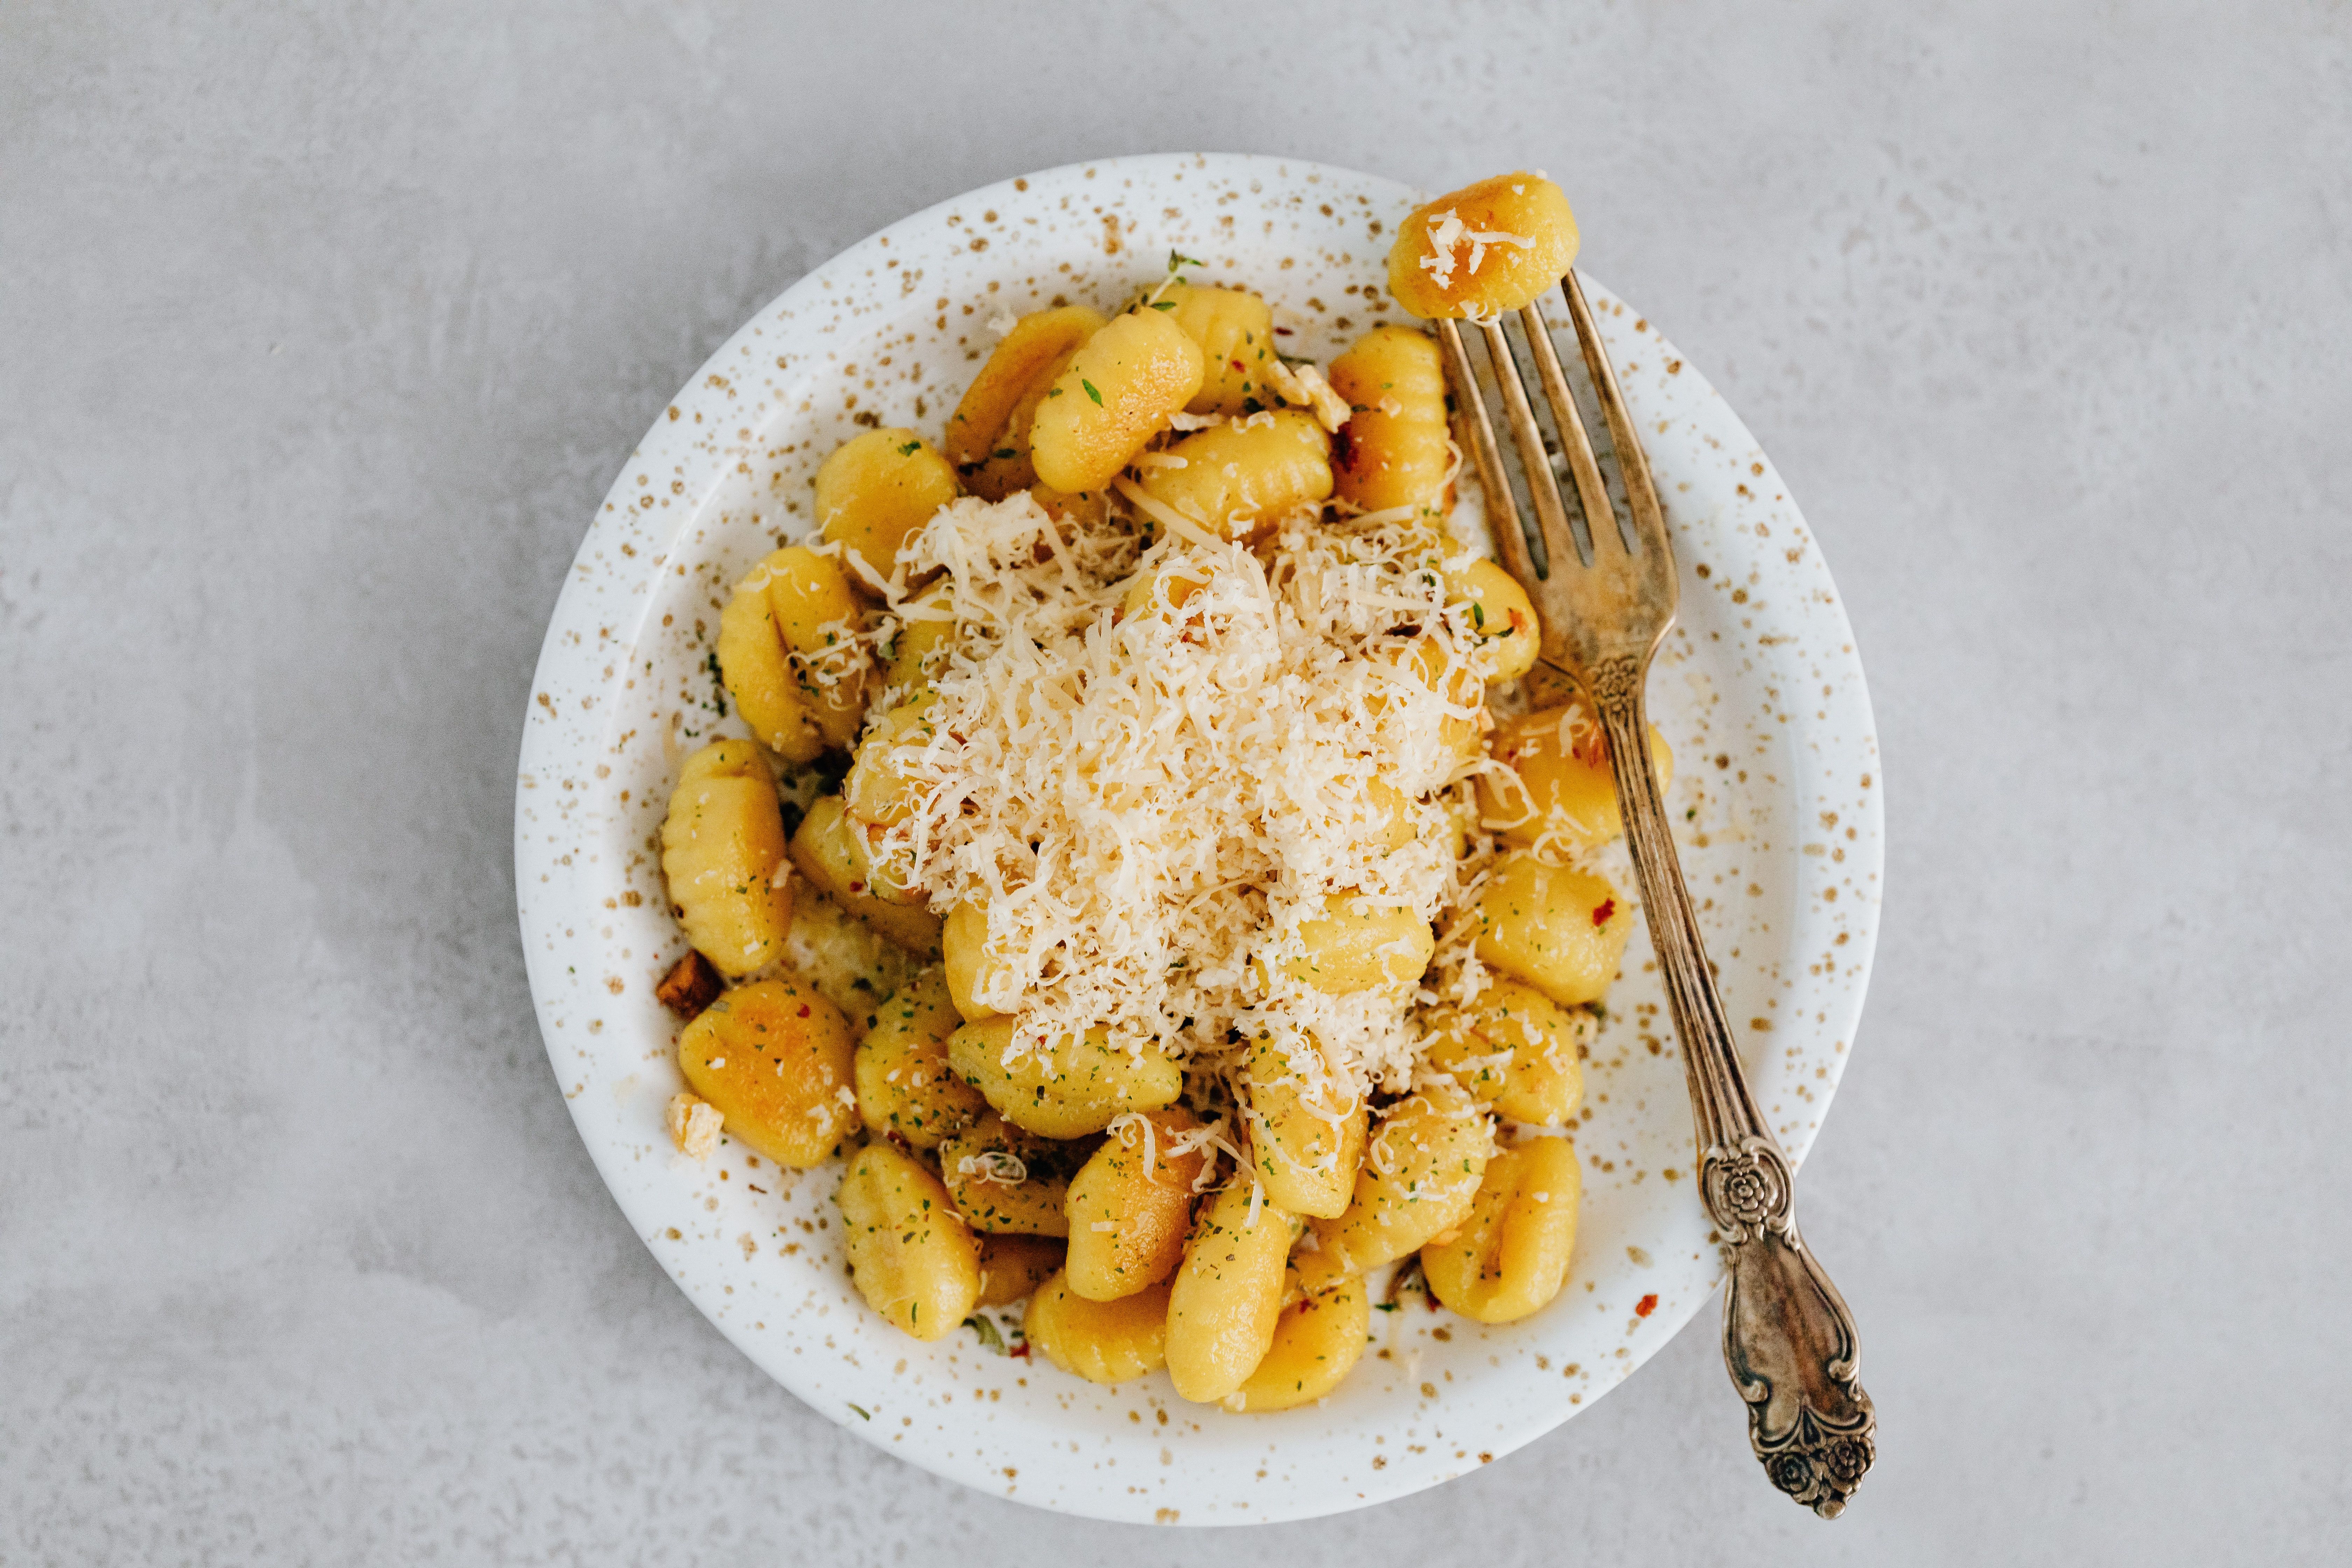 Gnocchi on a Ceramic Plate with Fork on the Side